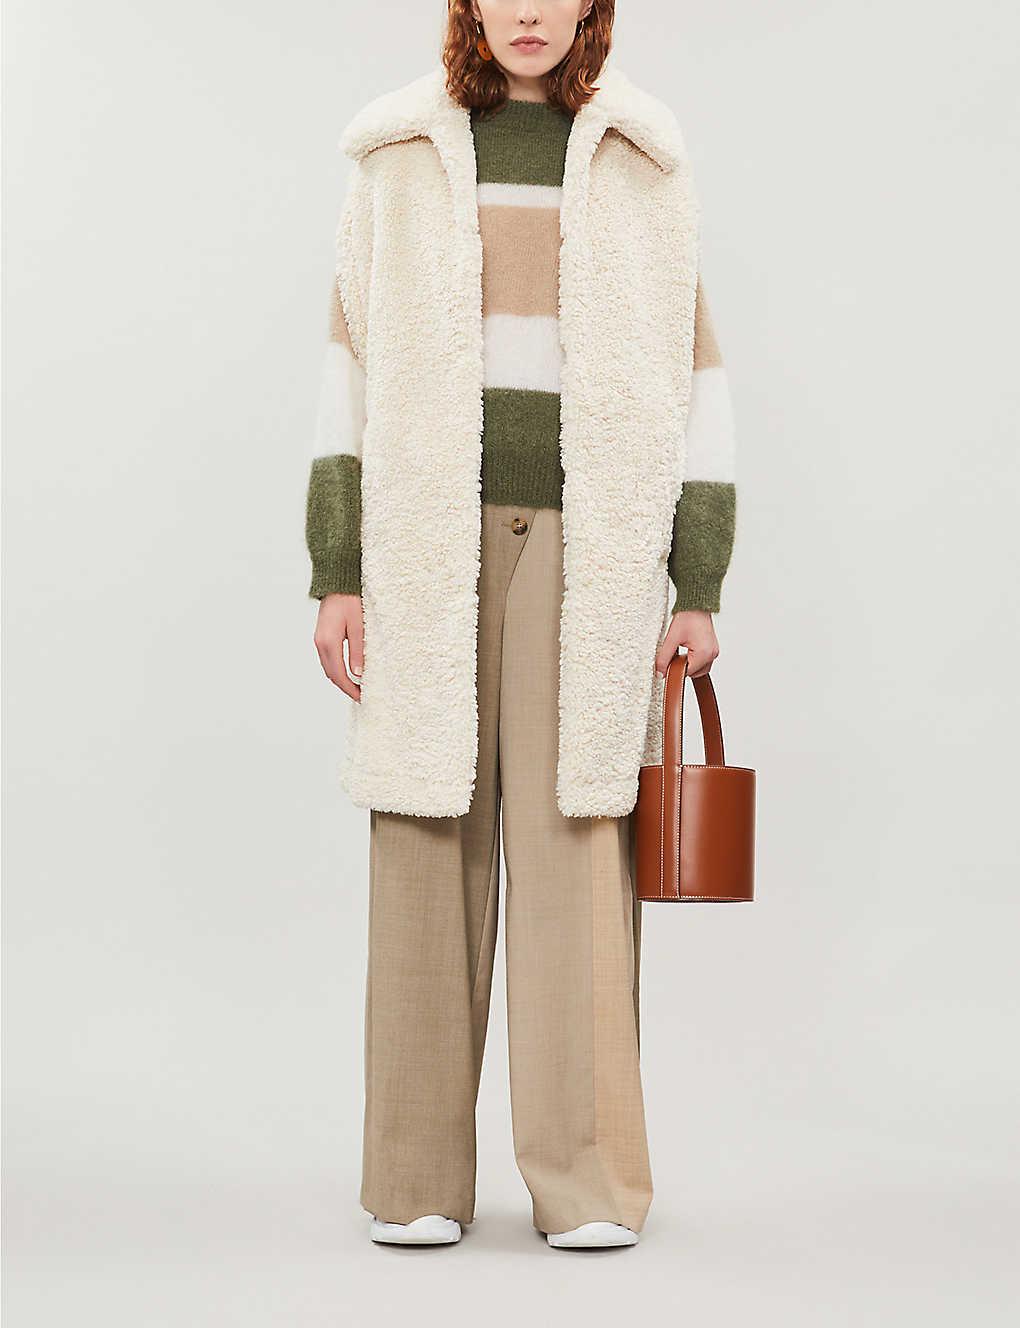 Maje Gladice Sleeveless Faux-fur Coat in Natural | Lyst